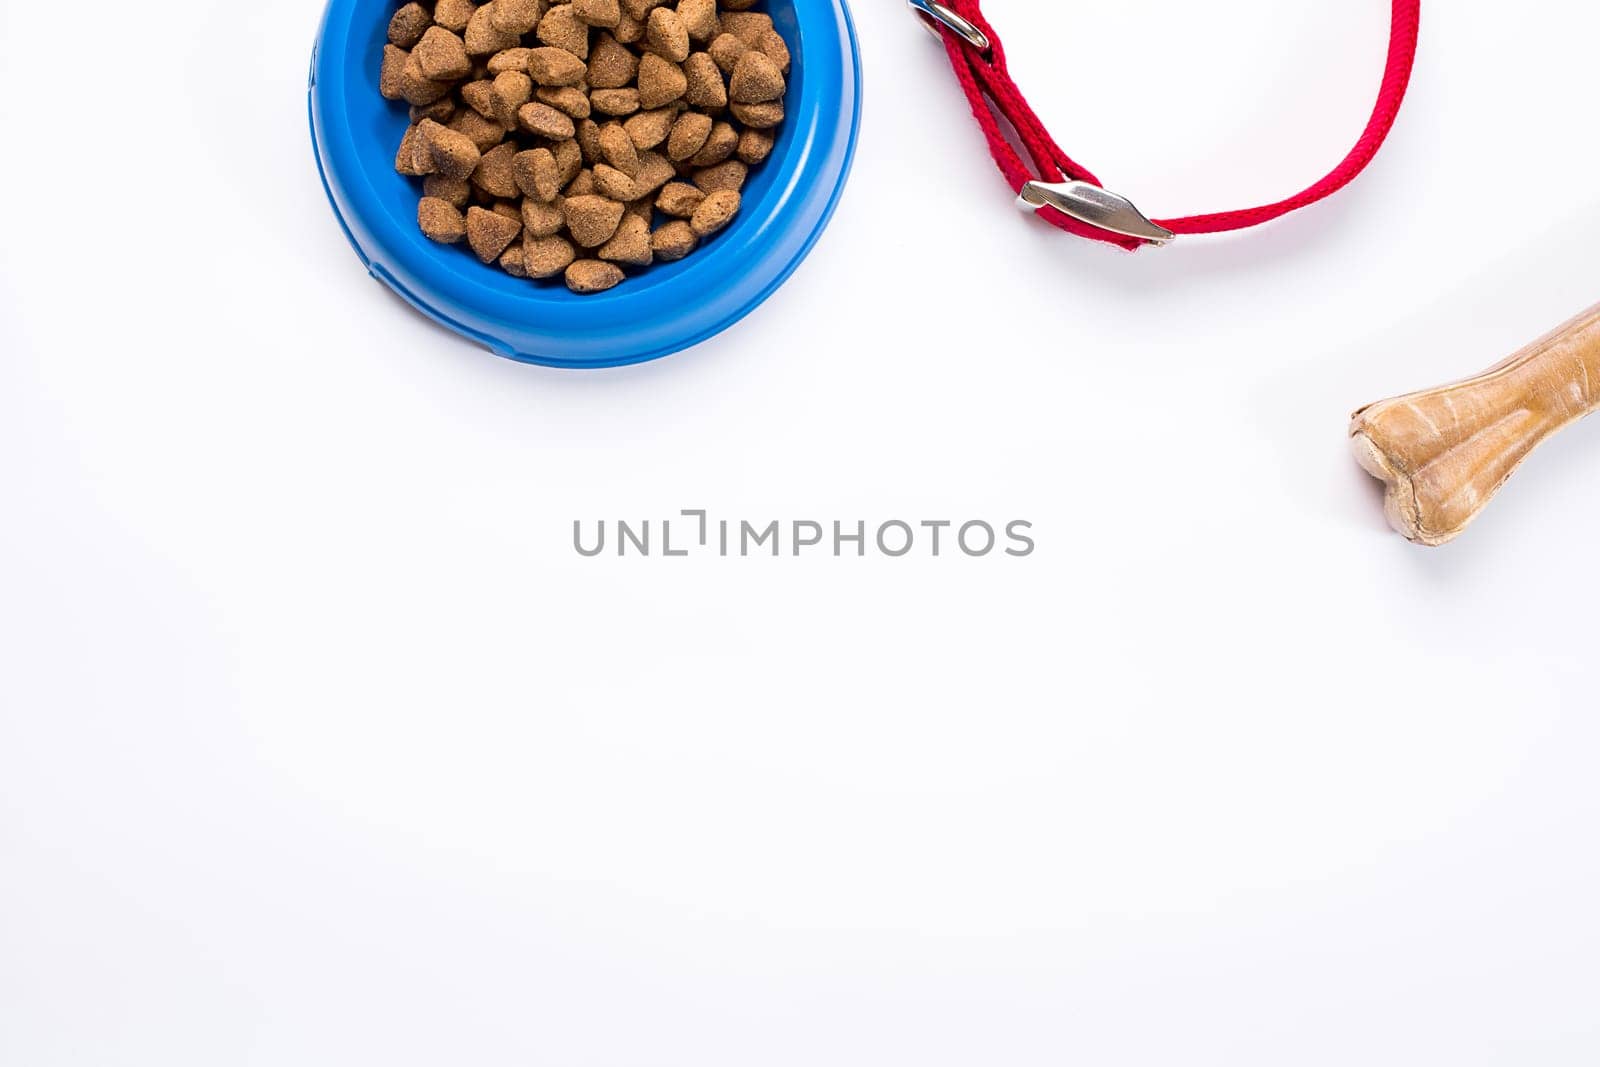 Collar, blue bowl with feed, leash and delicacy for dogs. Isolated on white background. Top view. Still life. Copy space